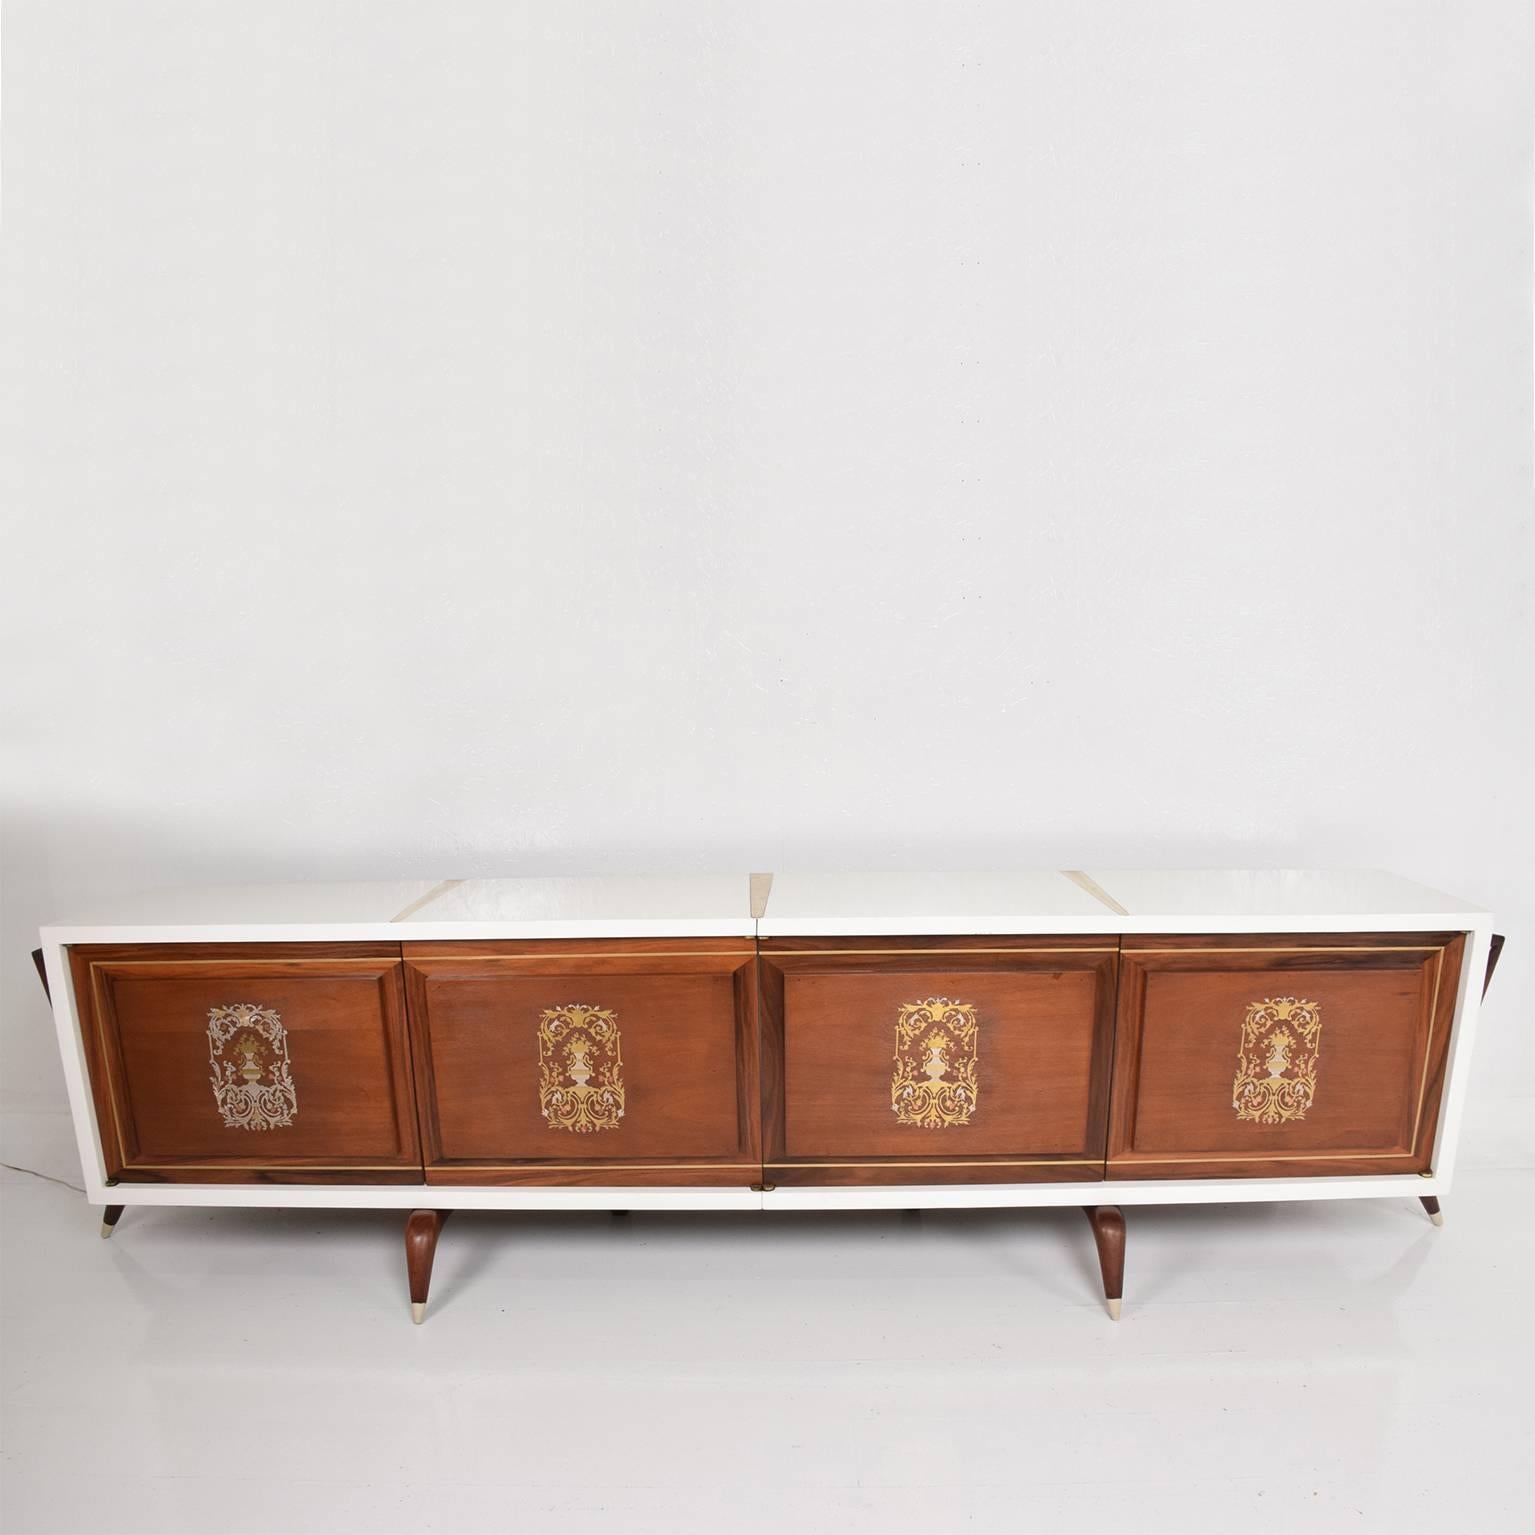 Mexican Stunning and Rare Mid-Century Modernist Custom Credenza, Mexico, 1950s